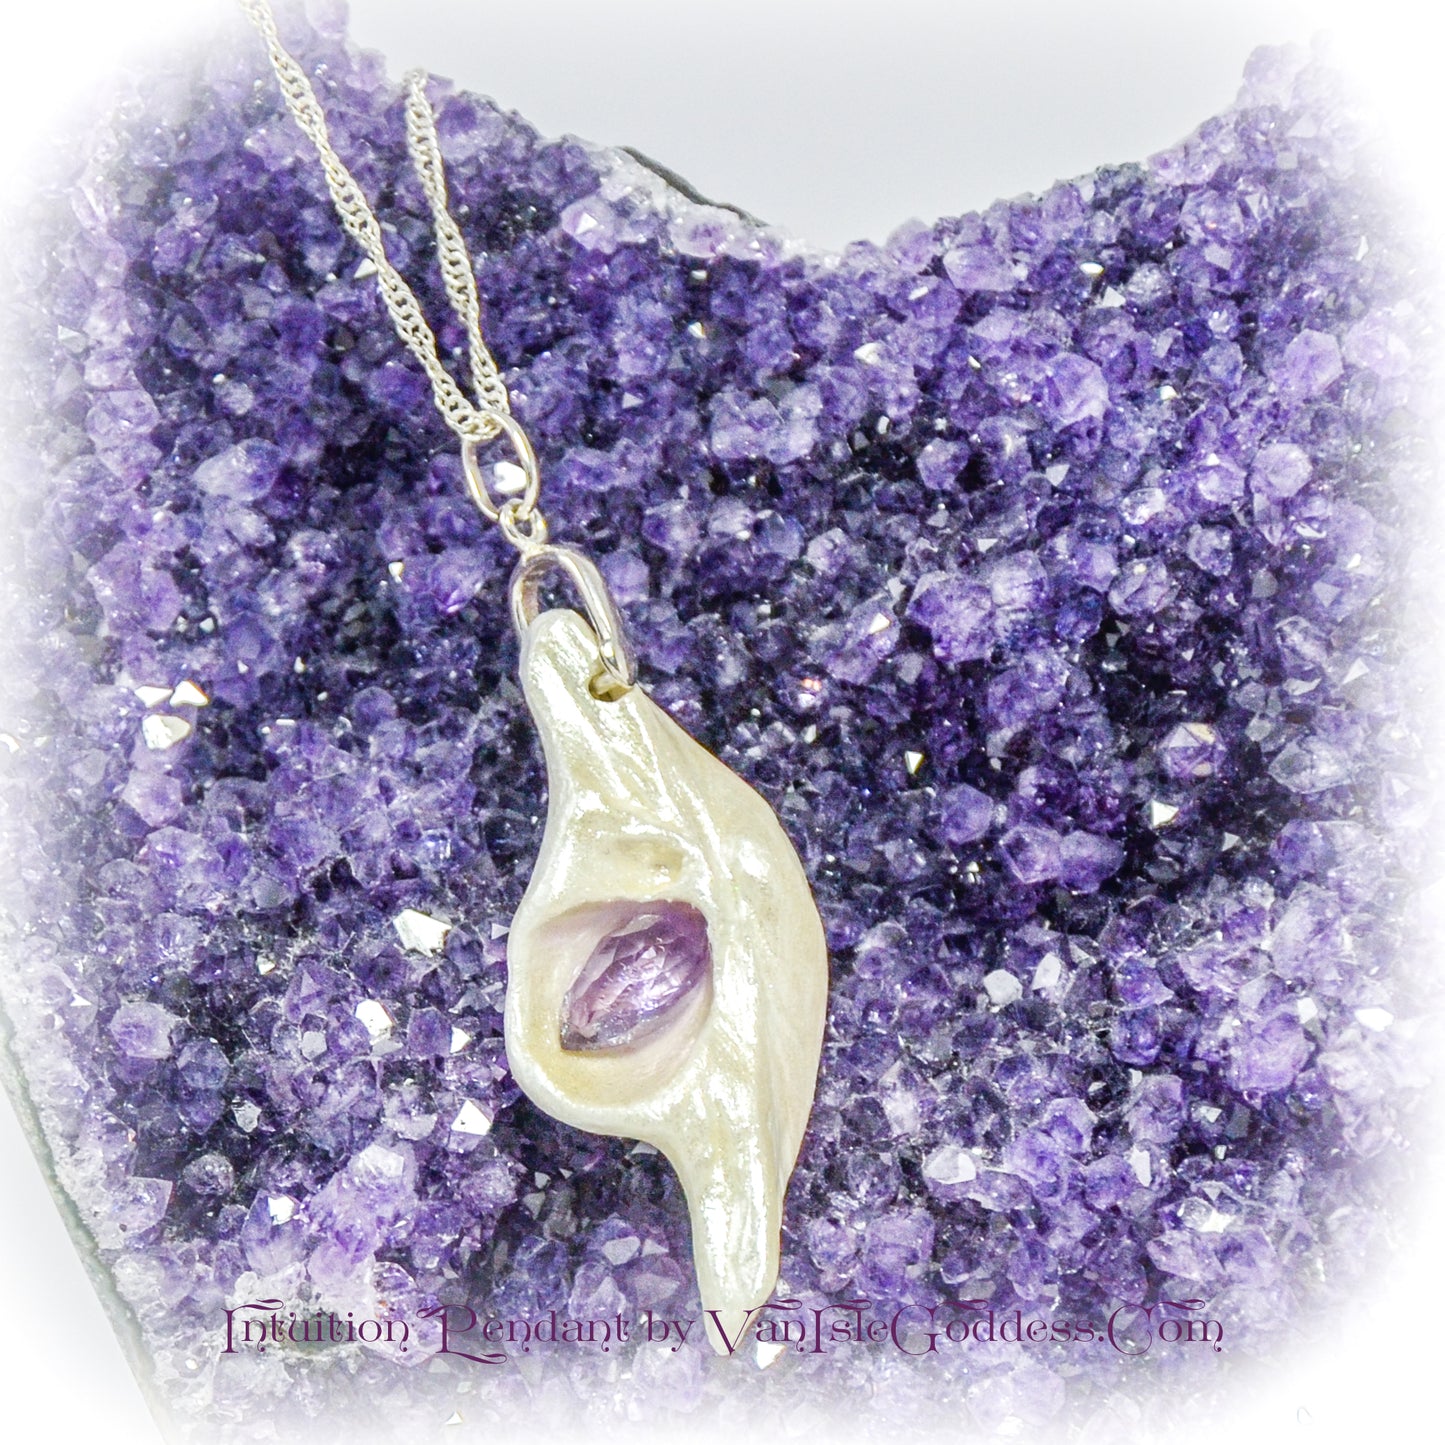 Intuition a natural seashell pendant with a beautiful rose cut marquise Amethyst.  The pendant is resting on a cluster of amethysts.